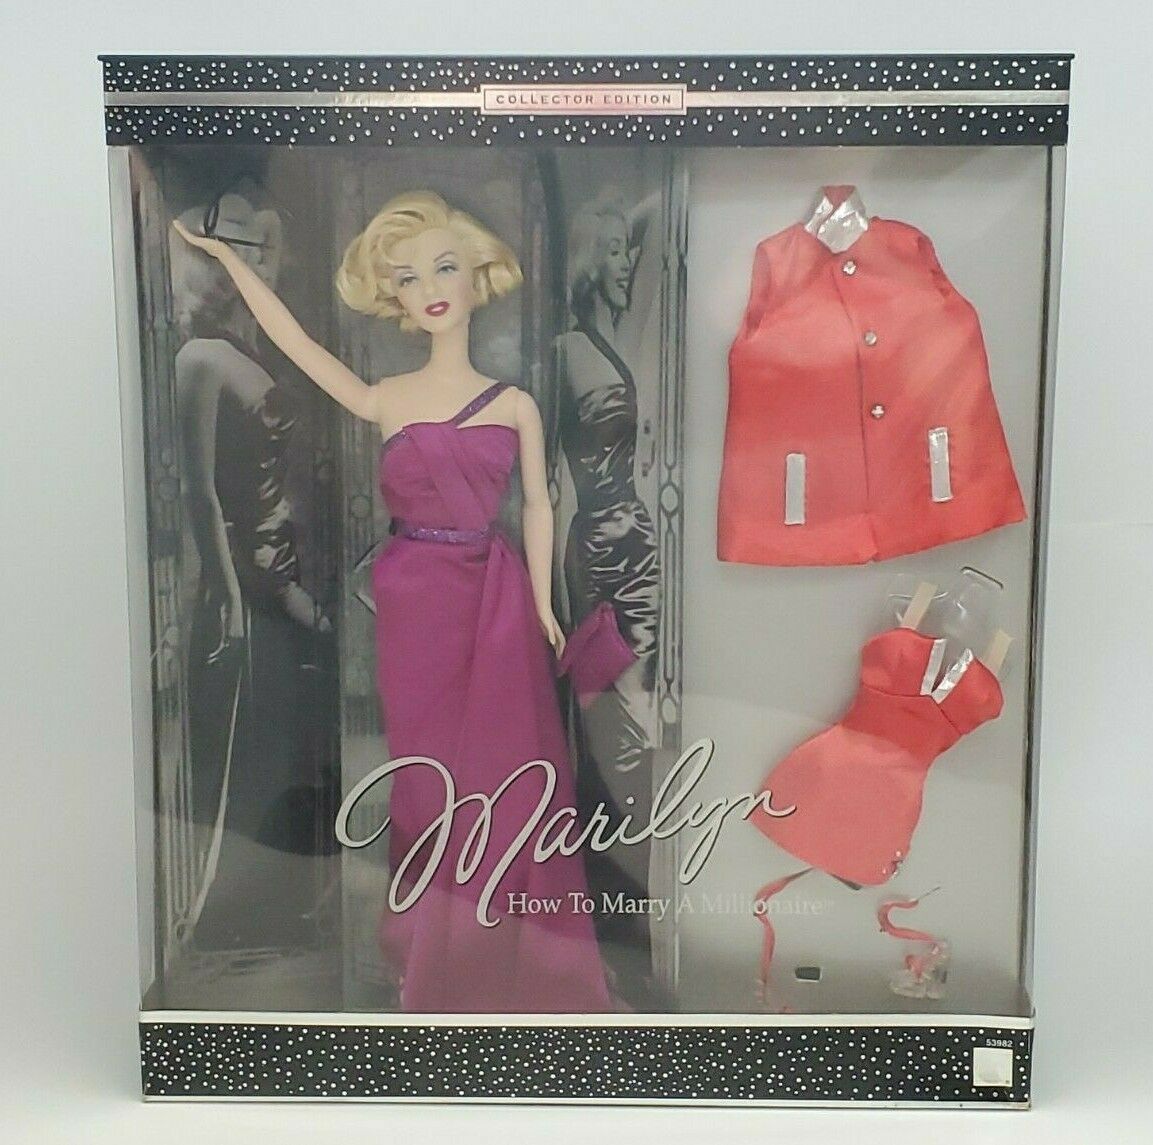 Barbie Marilyn How To Marry A Millionaire Collector Edition 2001